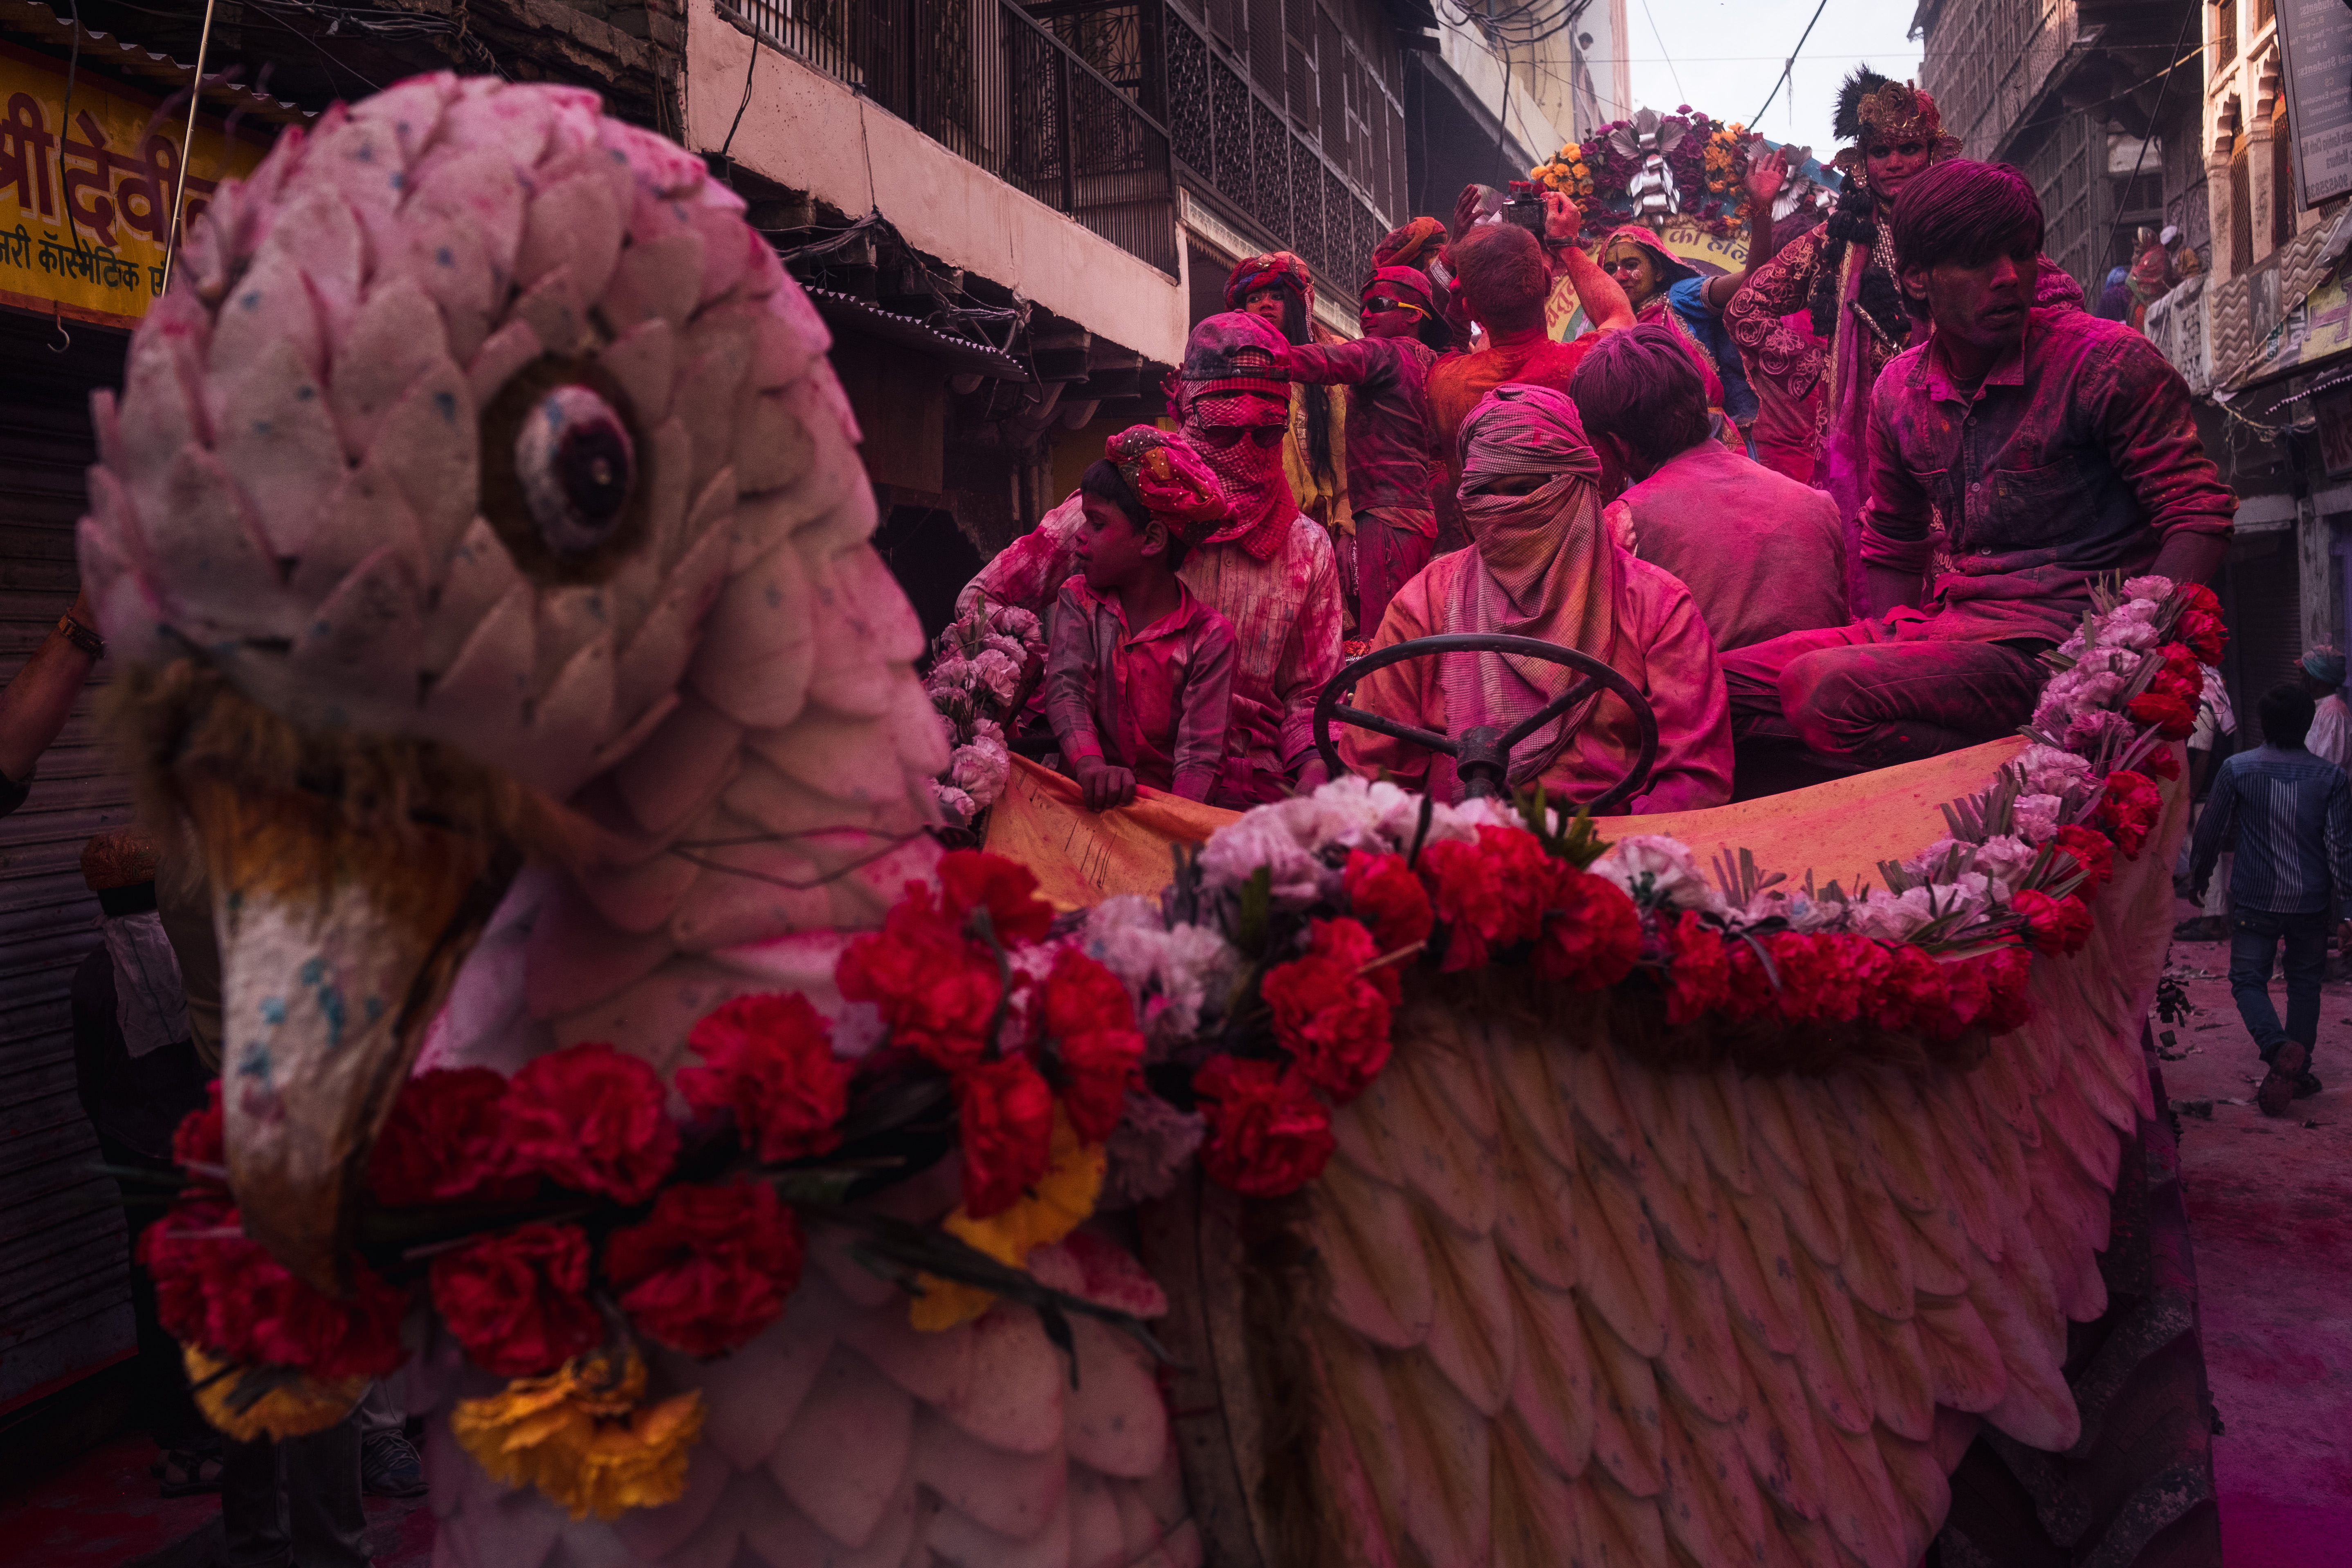 India Street Photography During Holi Festival. float and passengers covered in pink. Images by Jason Vinson